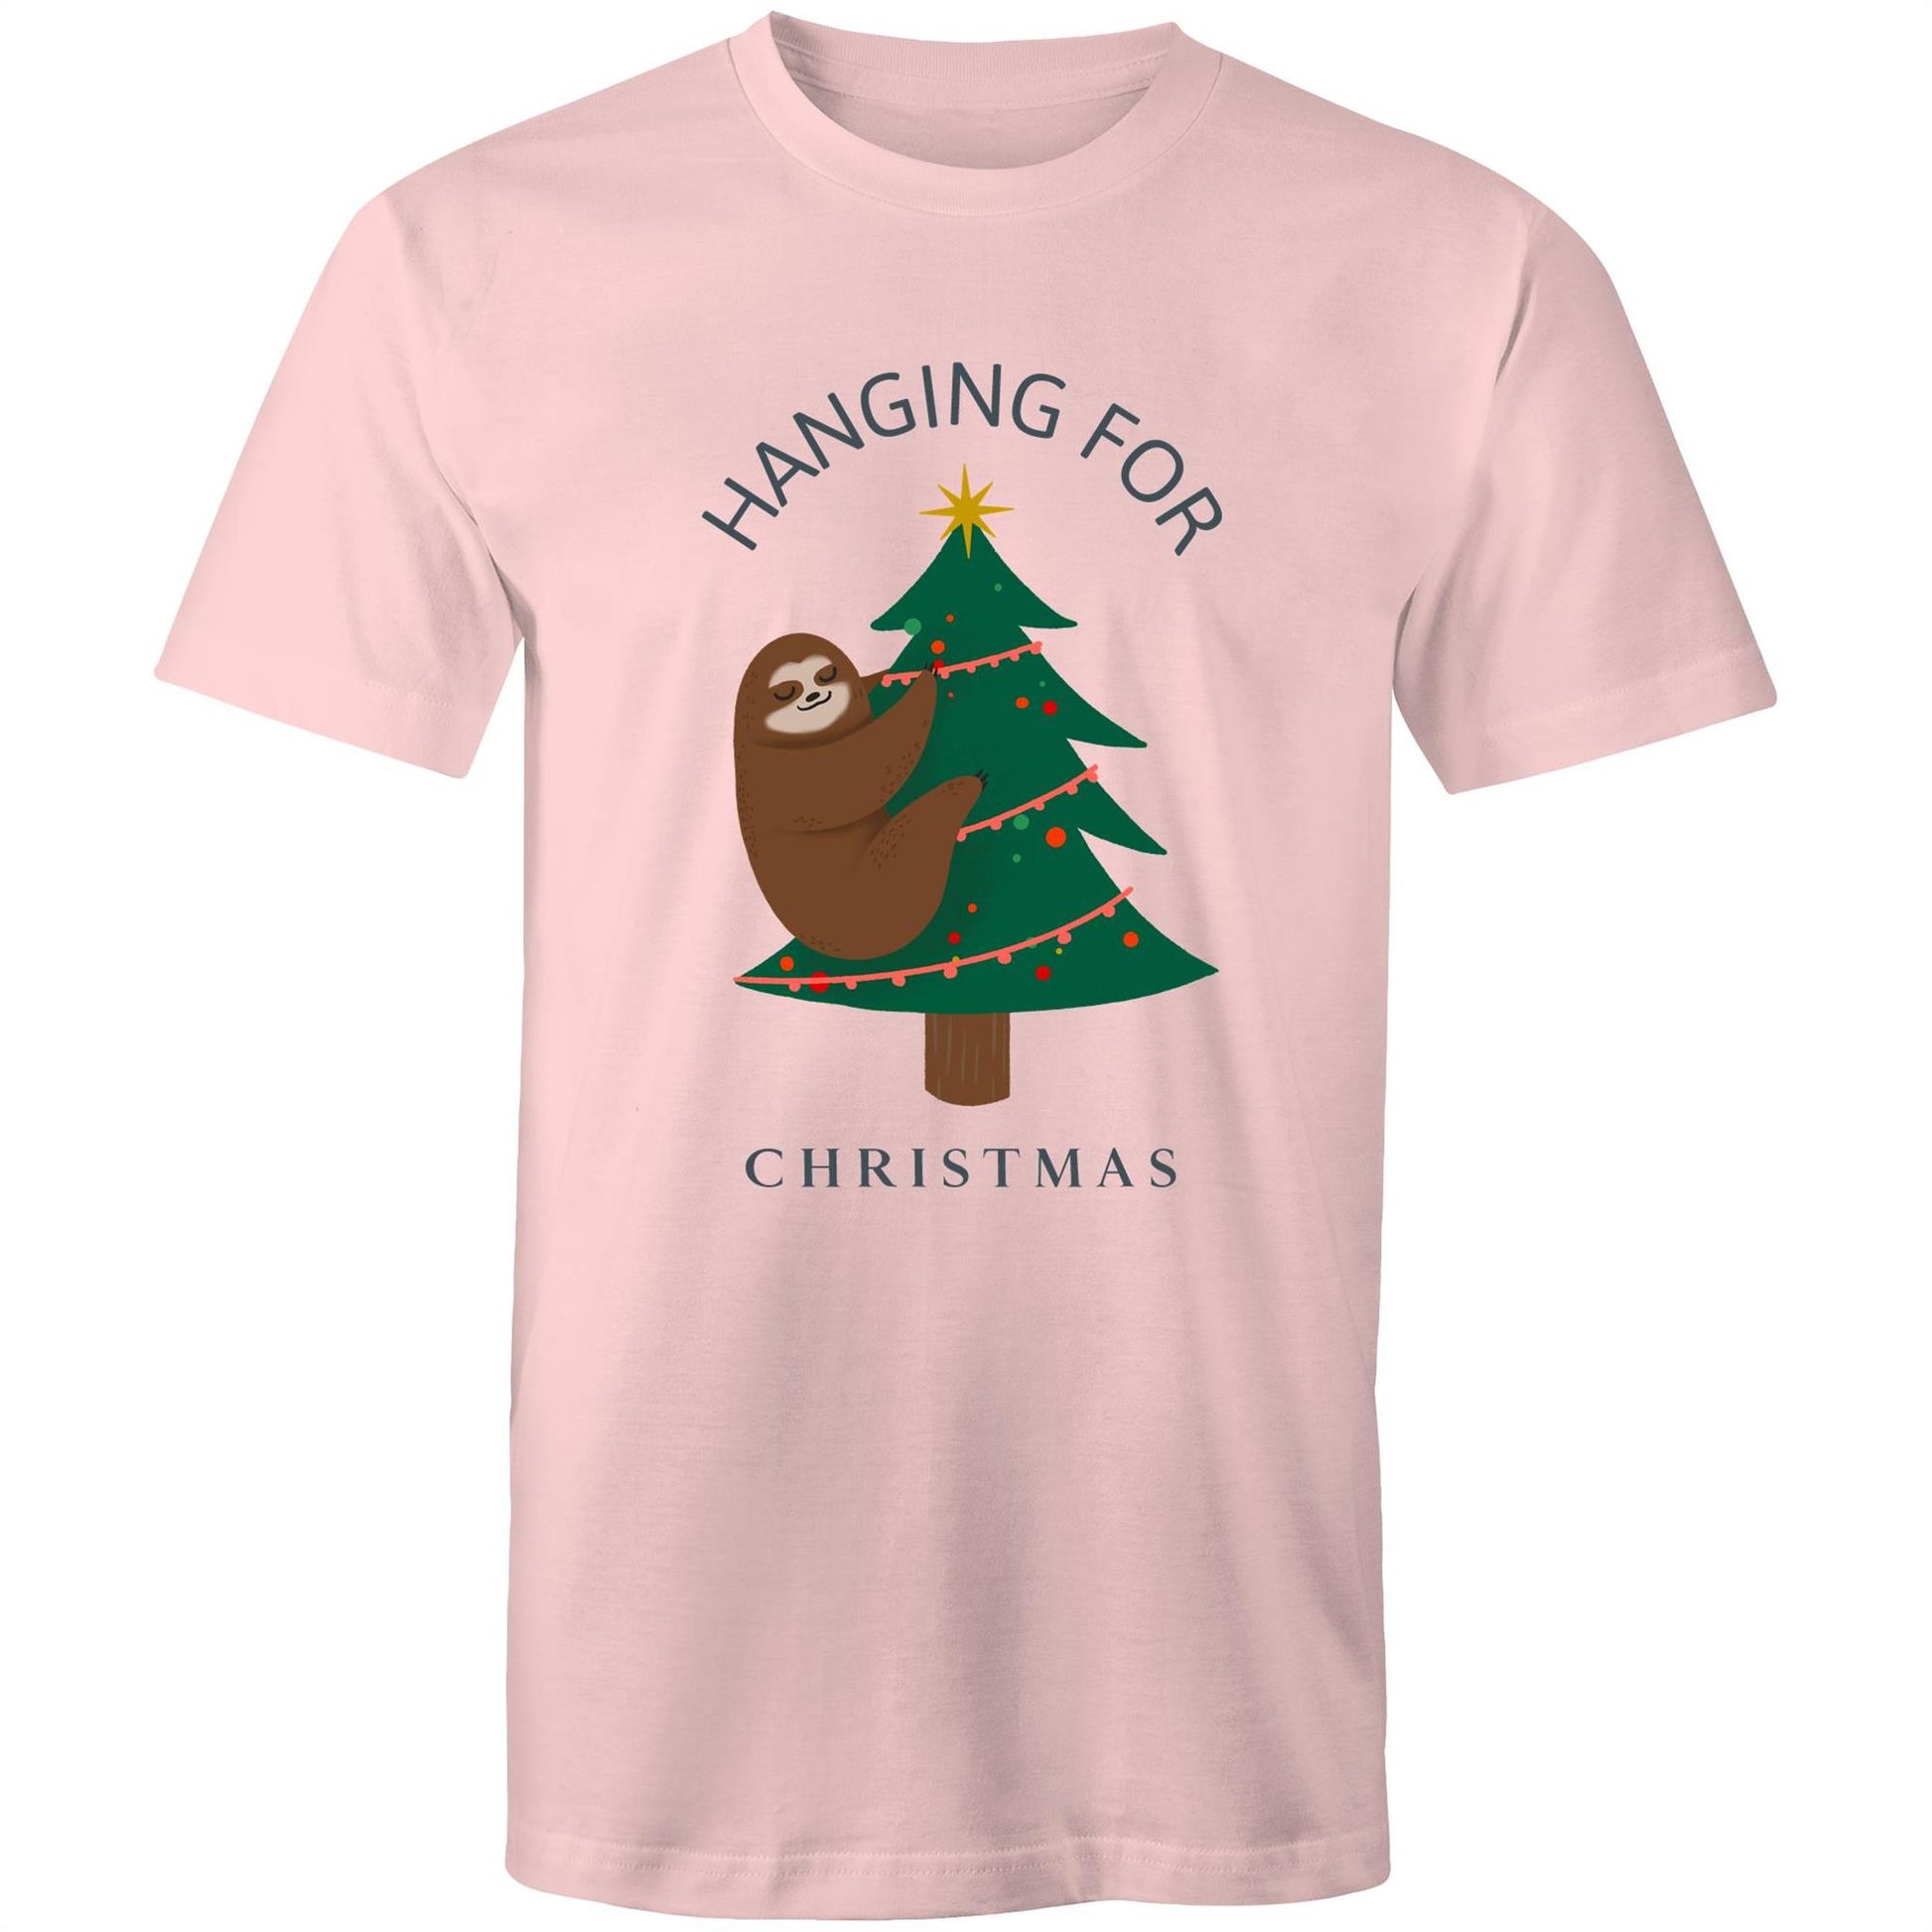 Hanging For Christmas - Mens T-Shirt Pink Christmas Mens T-shirt Merry Christmas